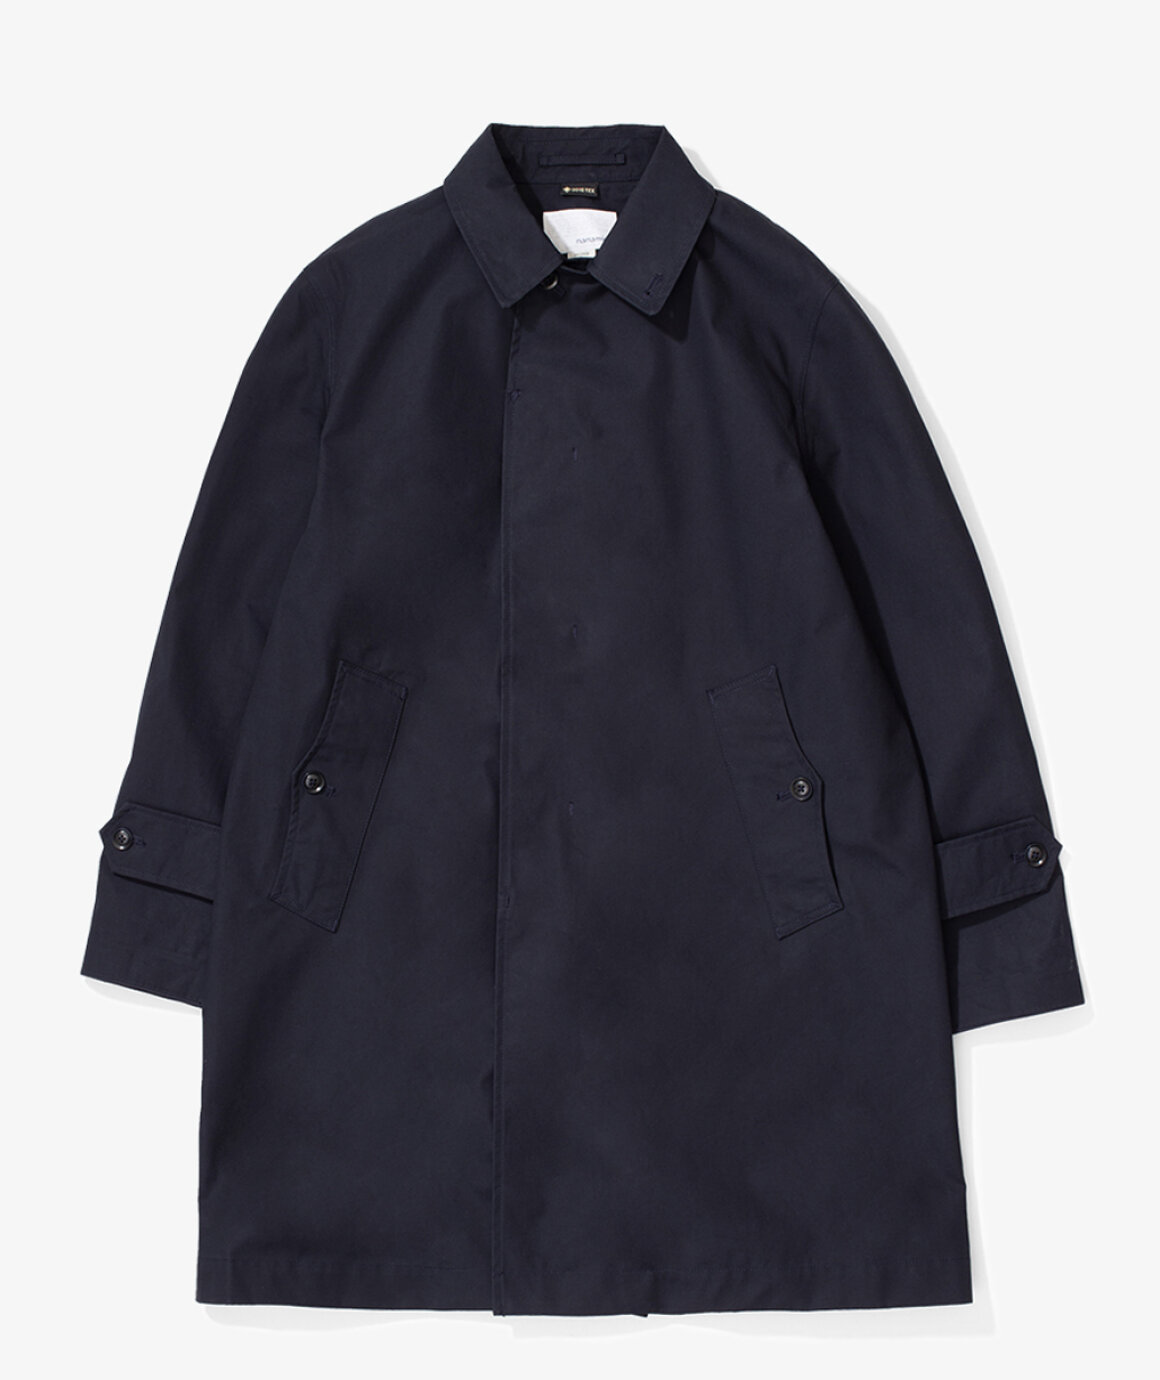 Norse Store | Shipping Worldwide - Gore-Tex Soutien Collar Coat by ...